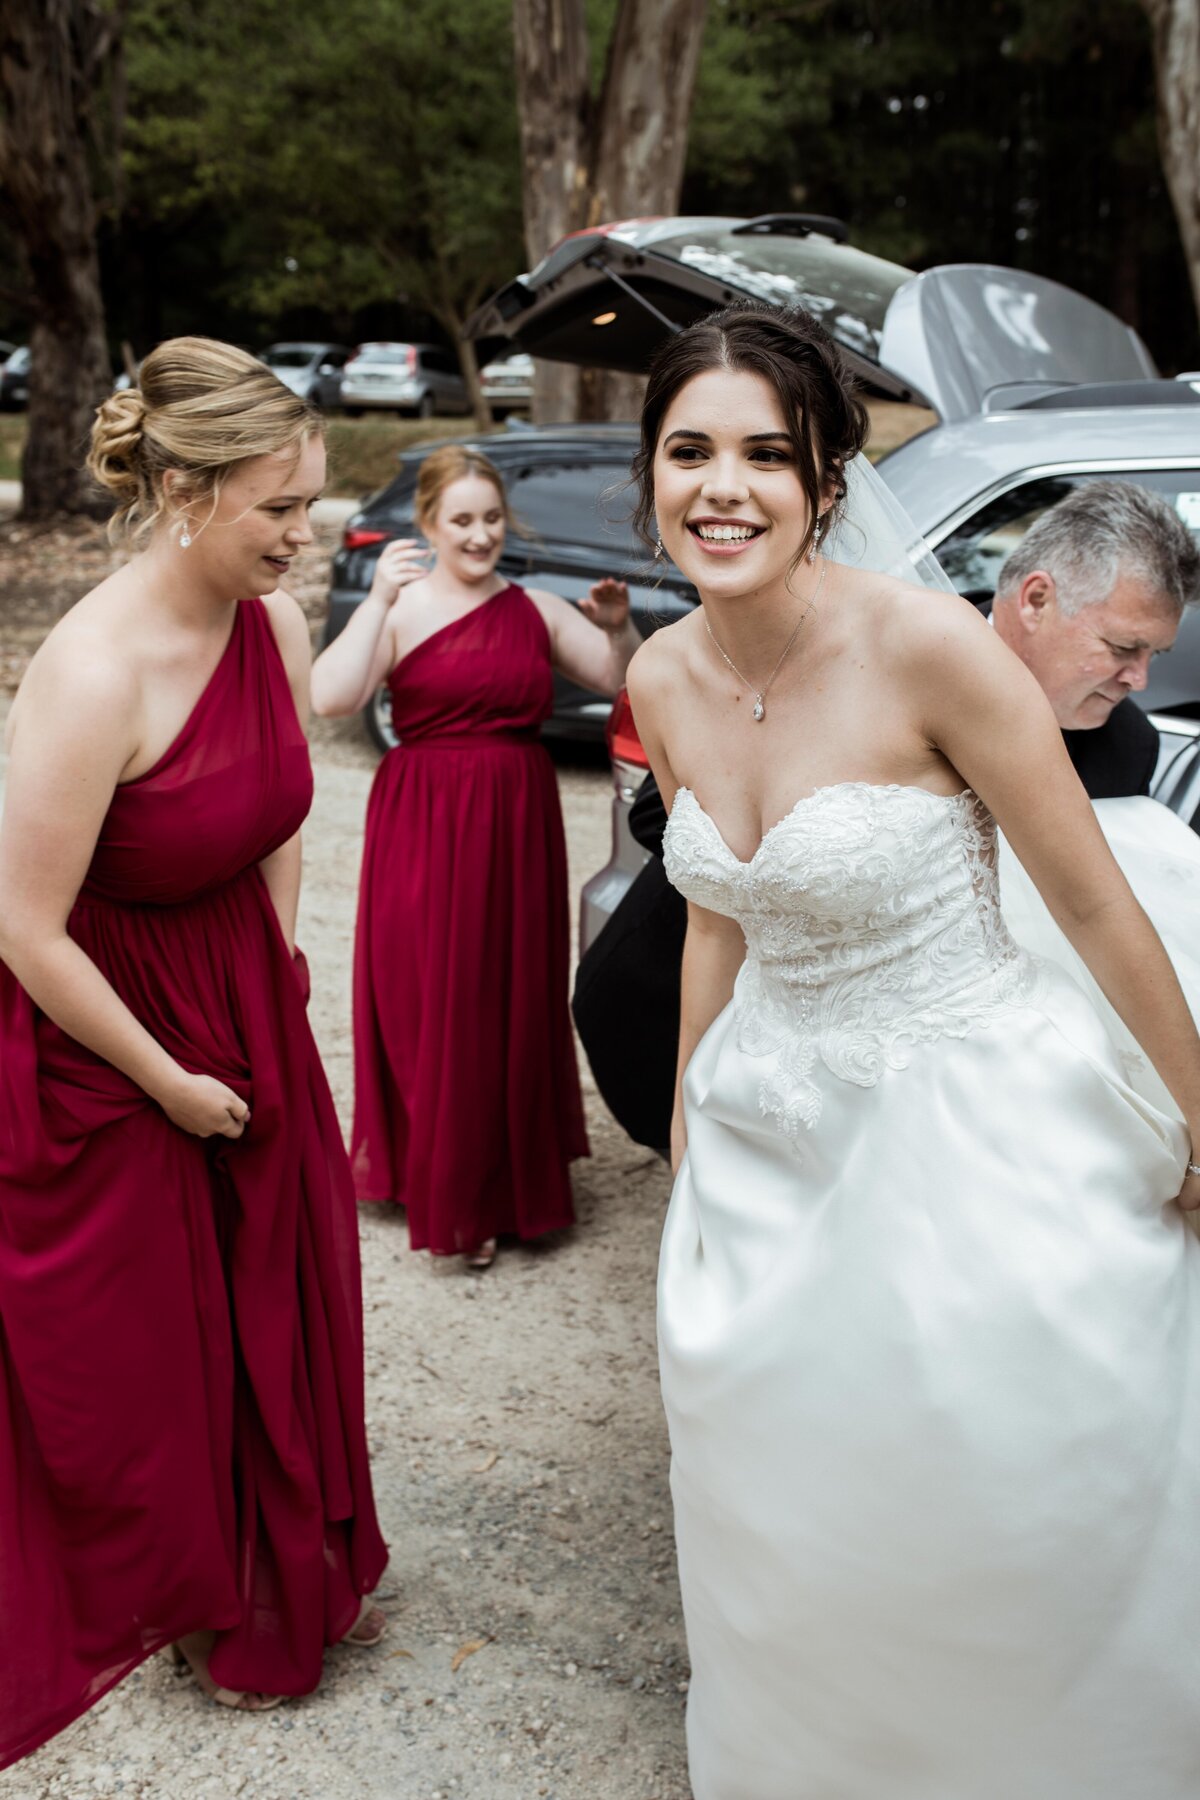 M&R-Anderson-Hill-Rexvil-Photography-Adelaide-Wedding-Photographer-327